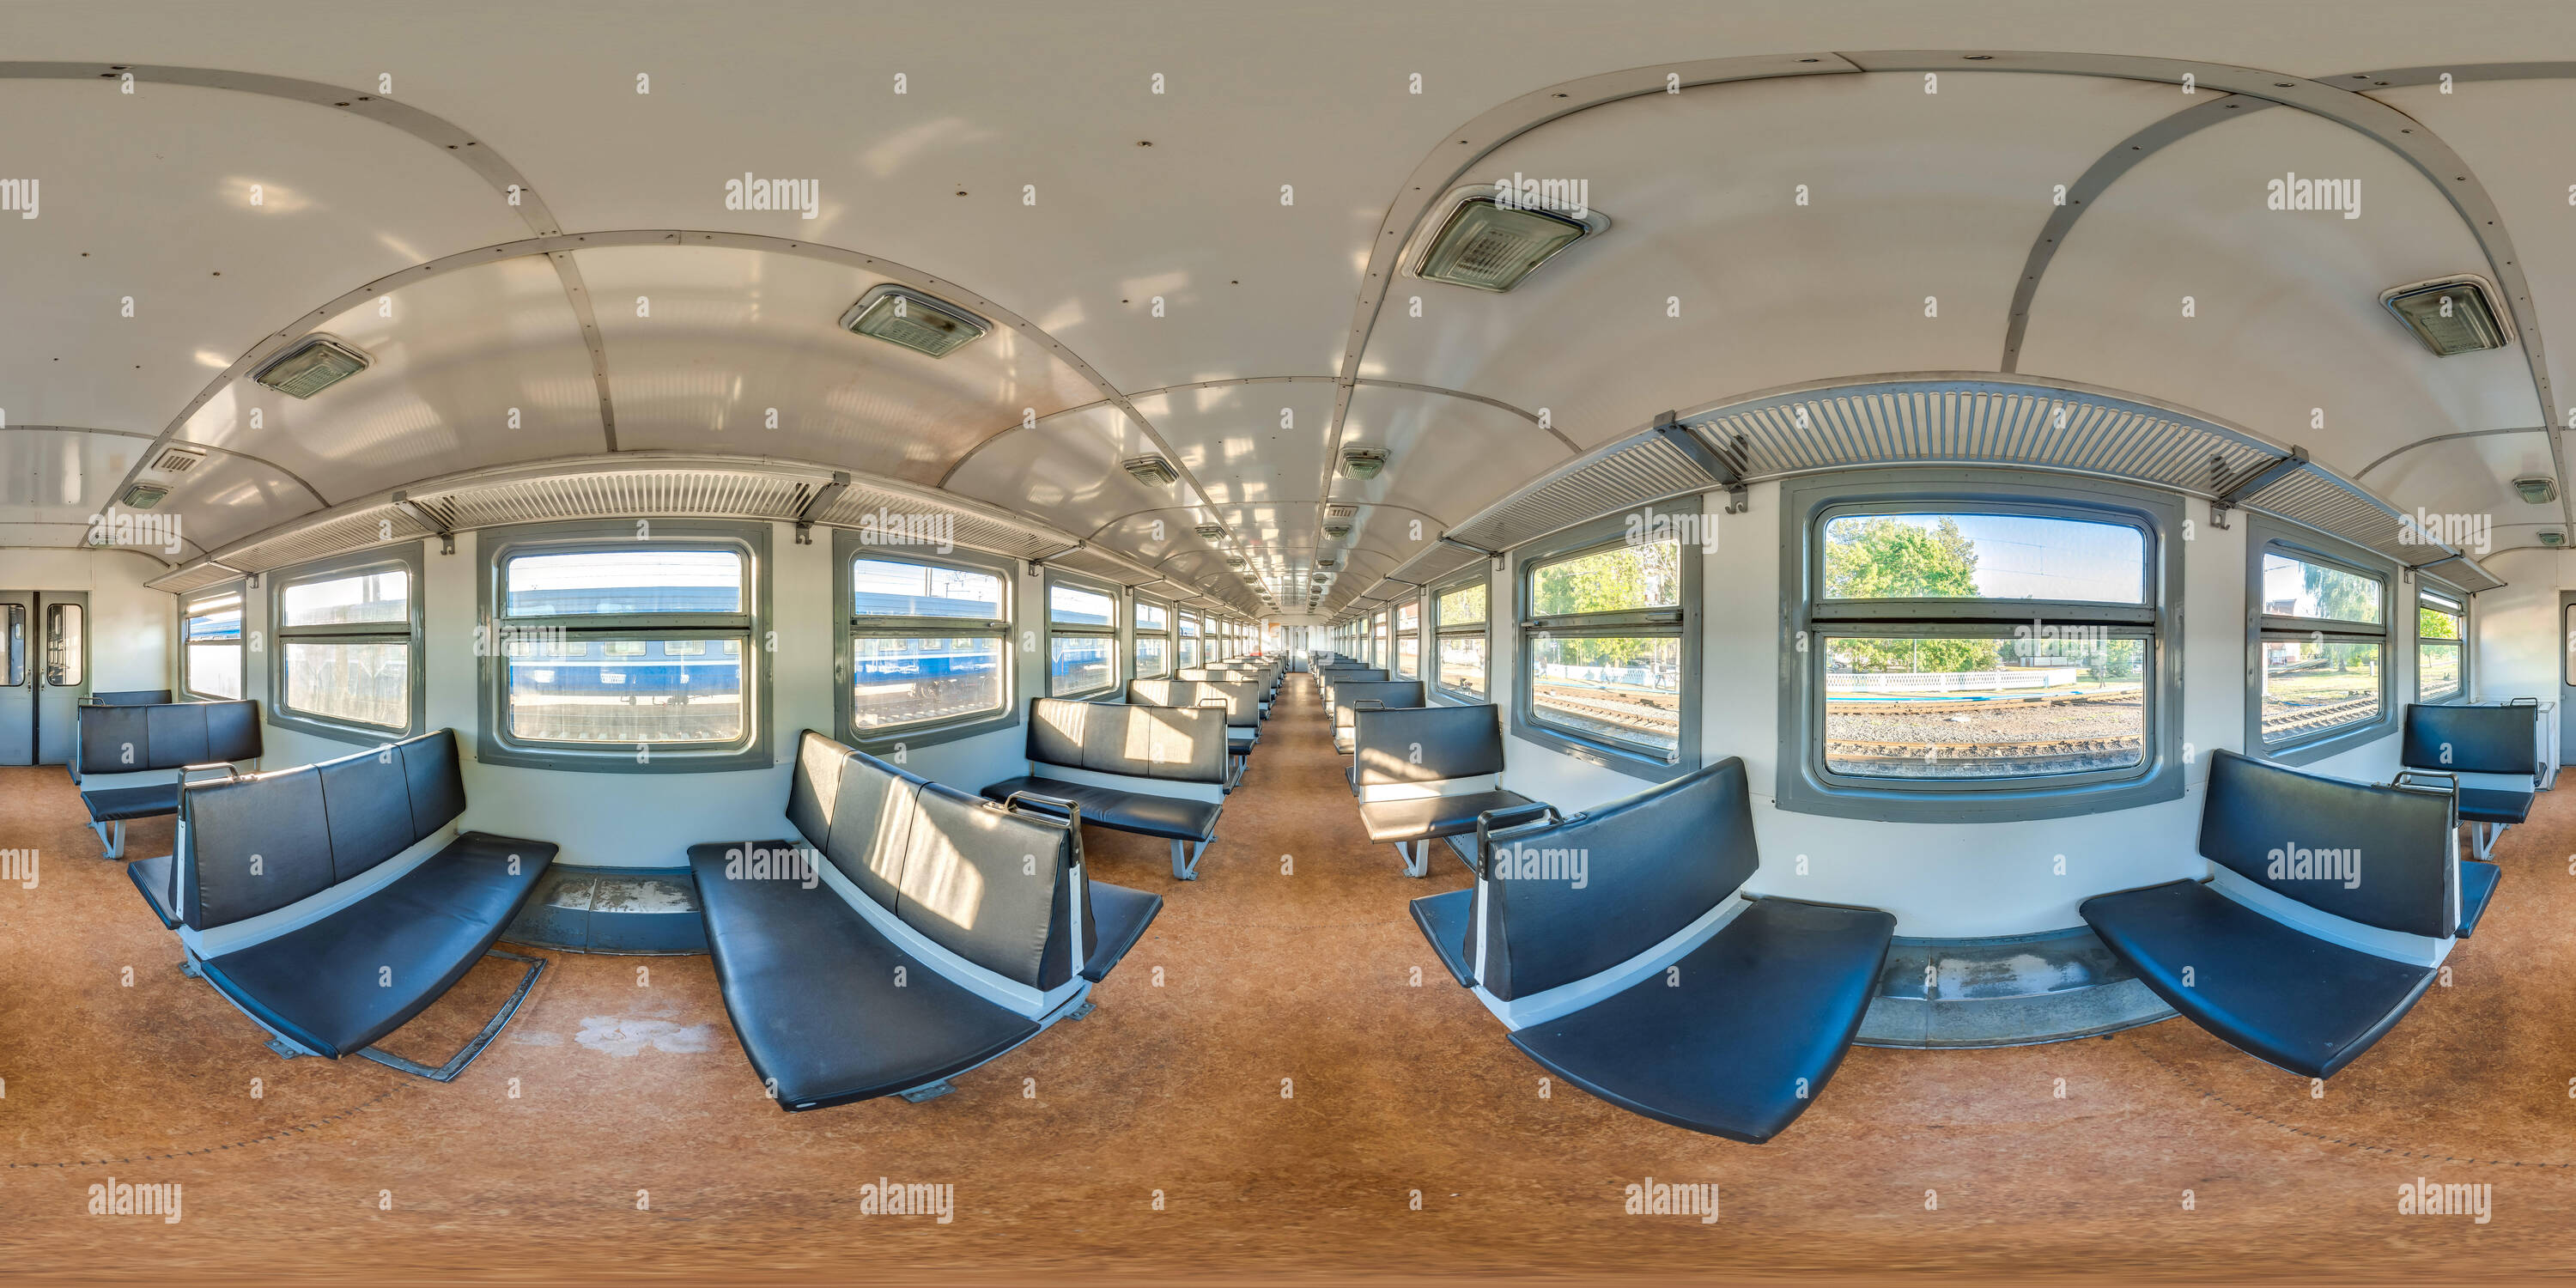 360 degree panoramic view of 3D spherical panorama with 360 viewing angle. Ready for virtual reality or VR. Full equirectangular projection. Interior of train with seating econom